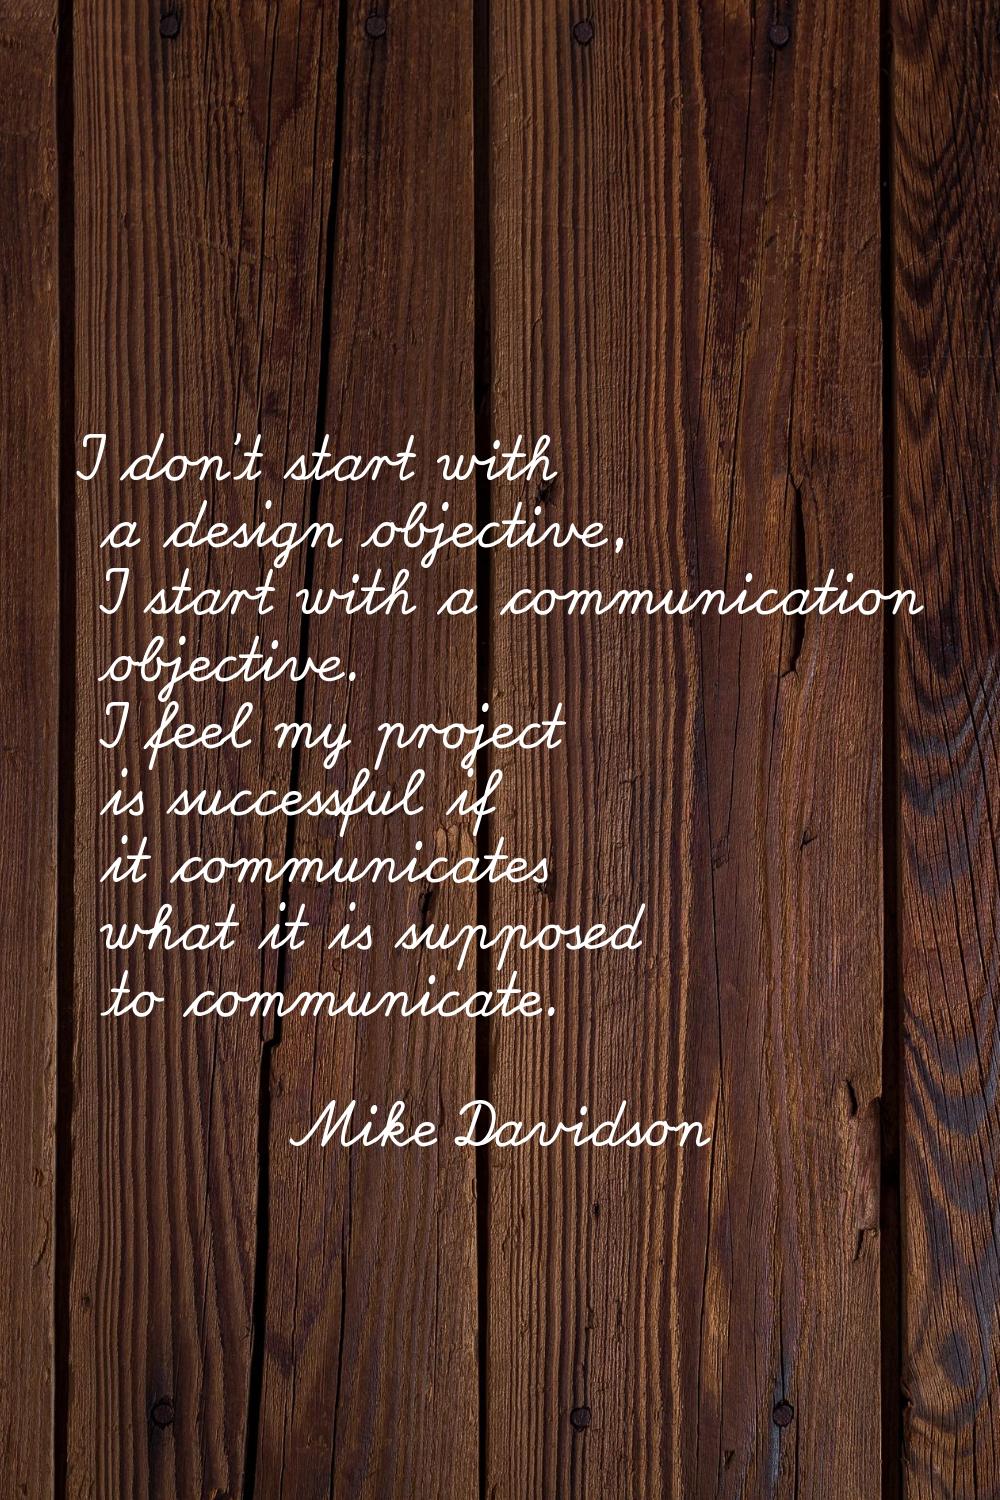 I don't start with a design objective, I start with a communication objective. I feel my project is